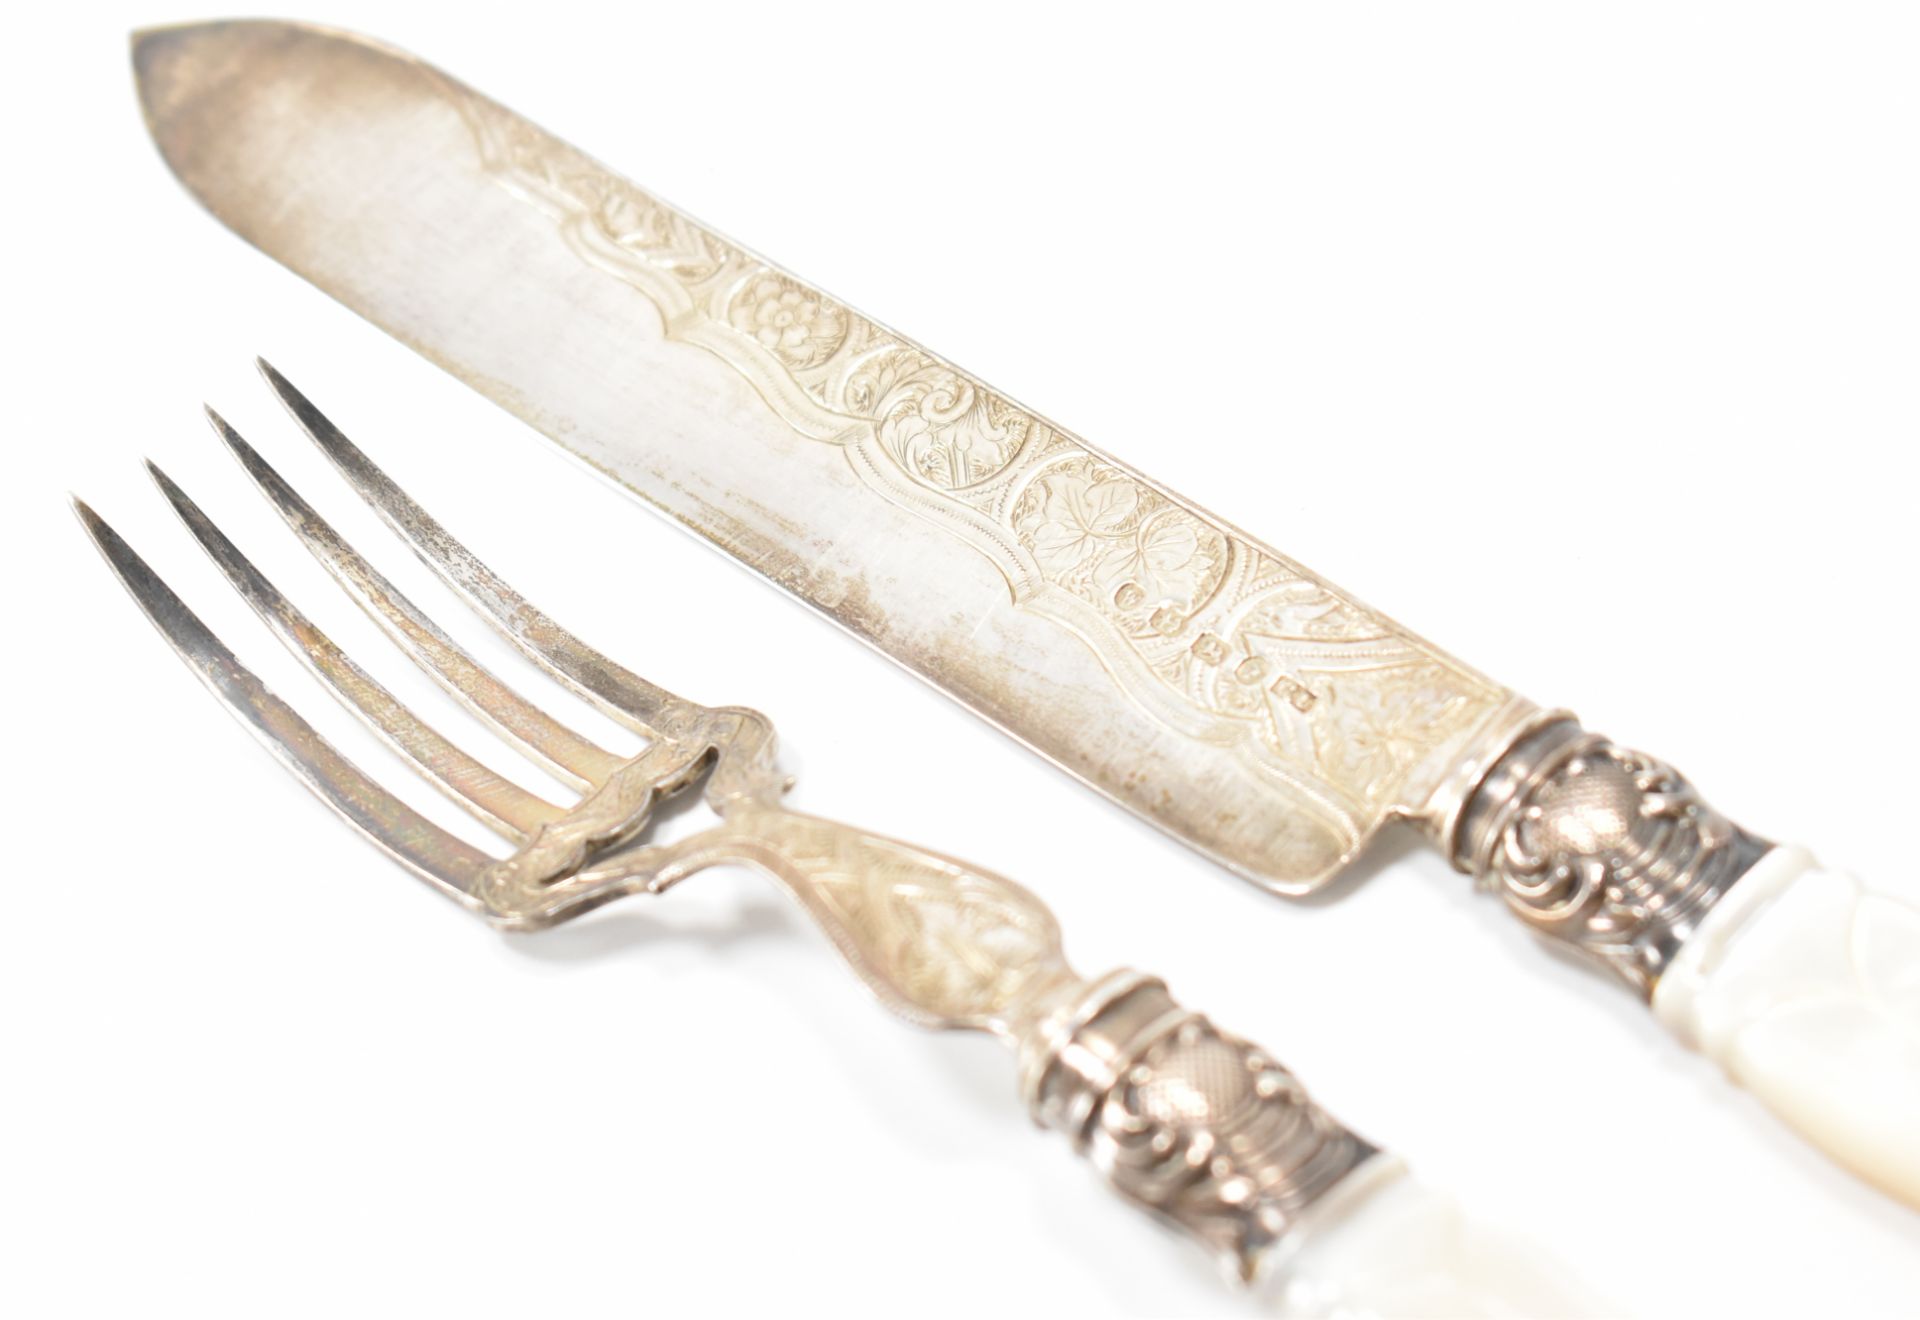 ANTIQUE SILVER & MOTHER OF PEARL SERVING SET - Image 2 of 5